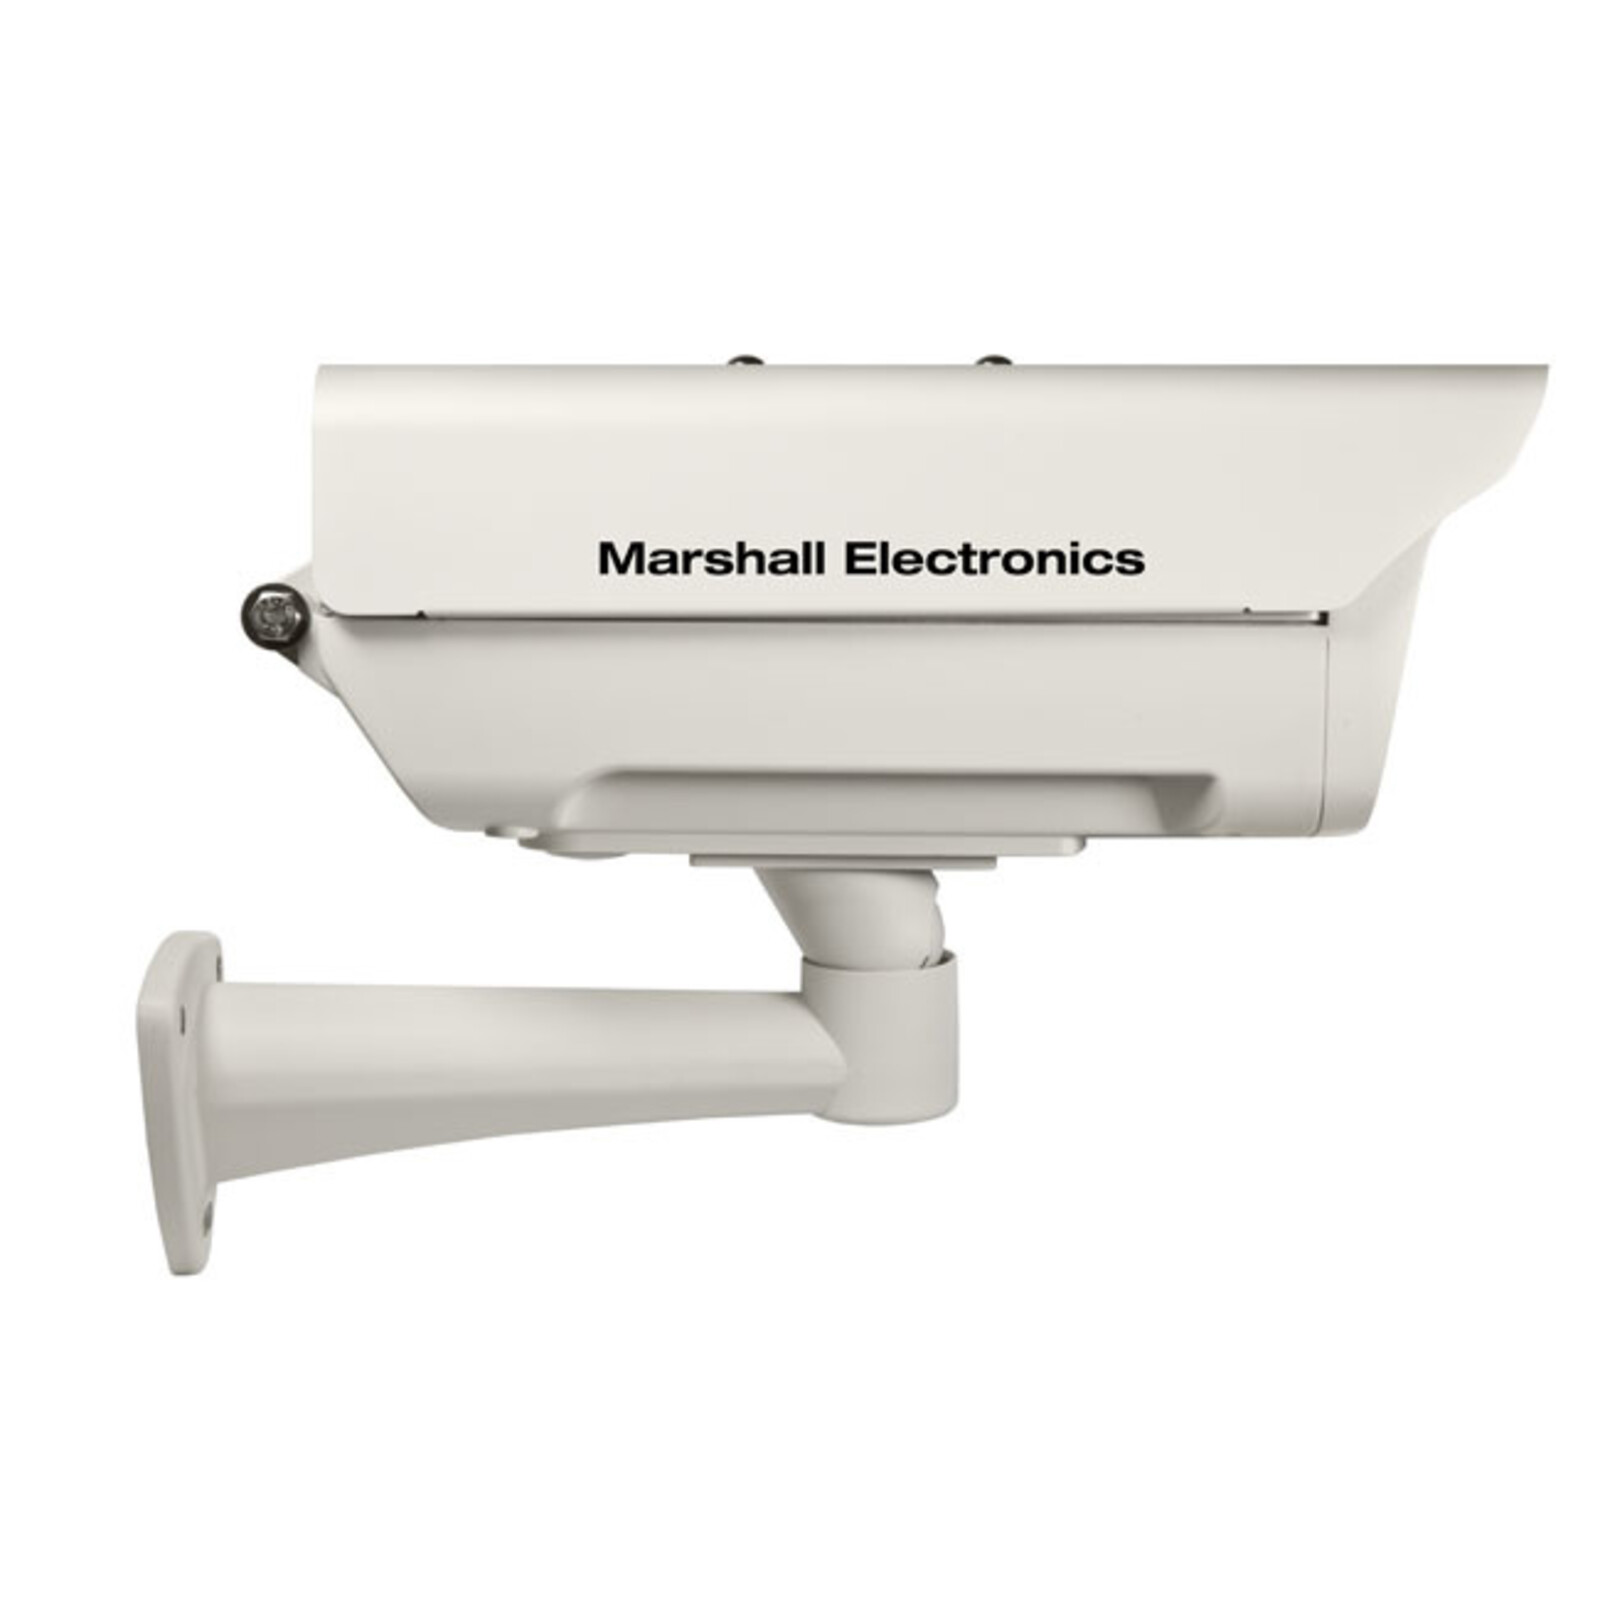 Marshall Weatherproof Housing with Fan & Heater for Compact & Zoom Block Cameras